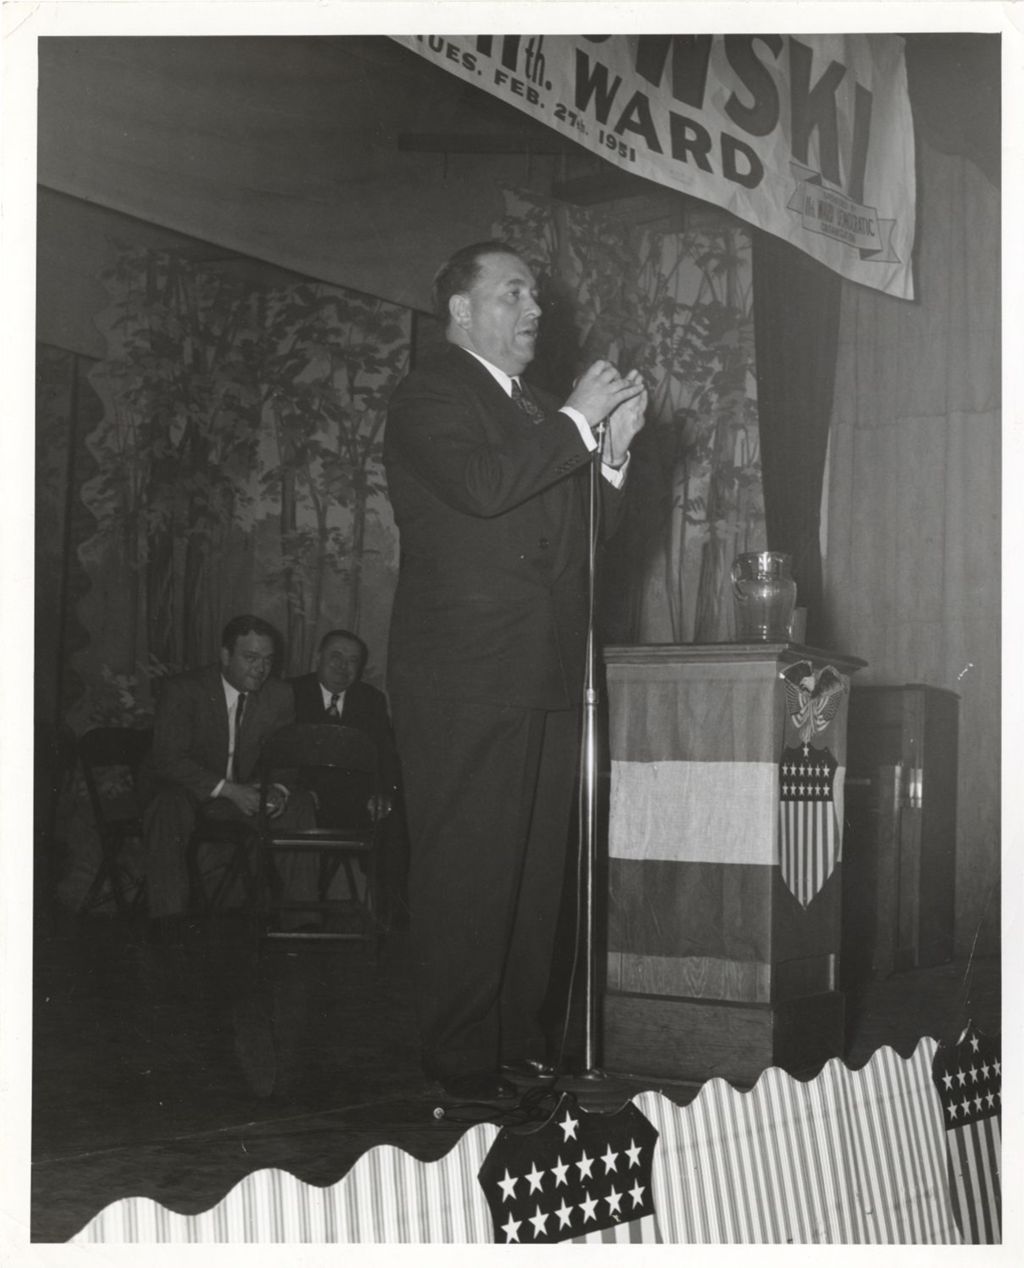 Miniature of Richard J. Daley giving a speech at a country club